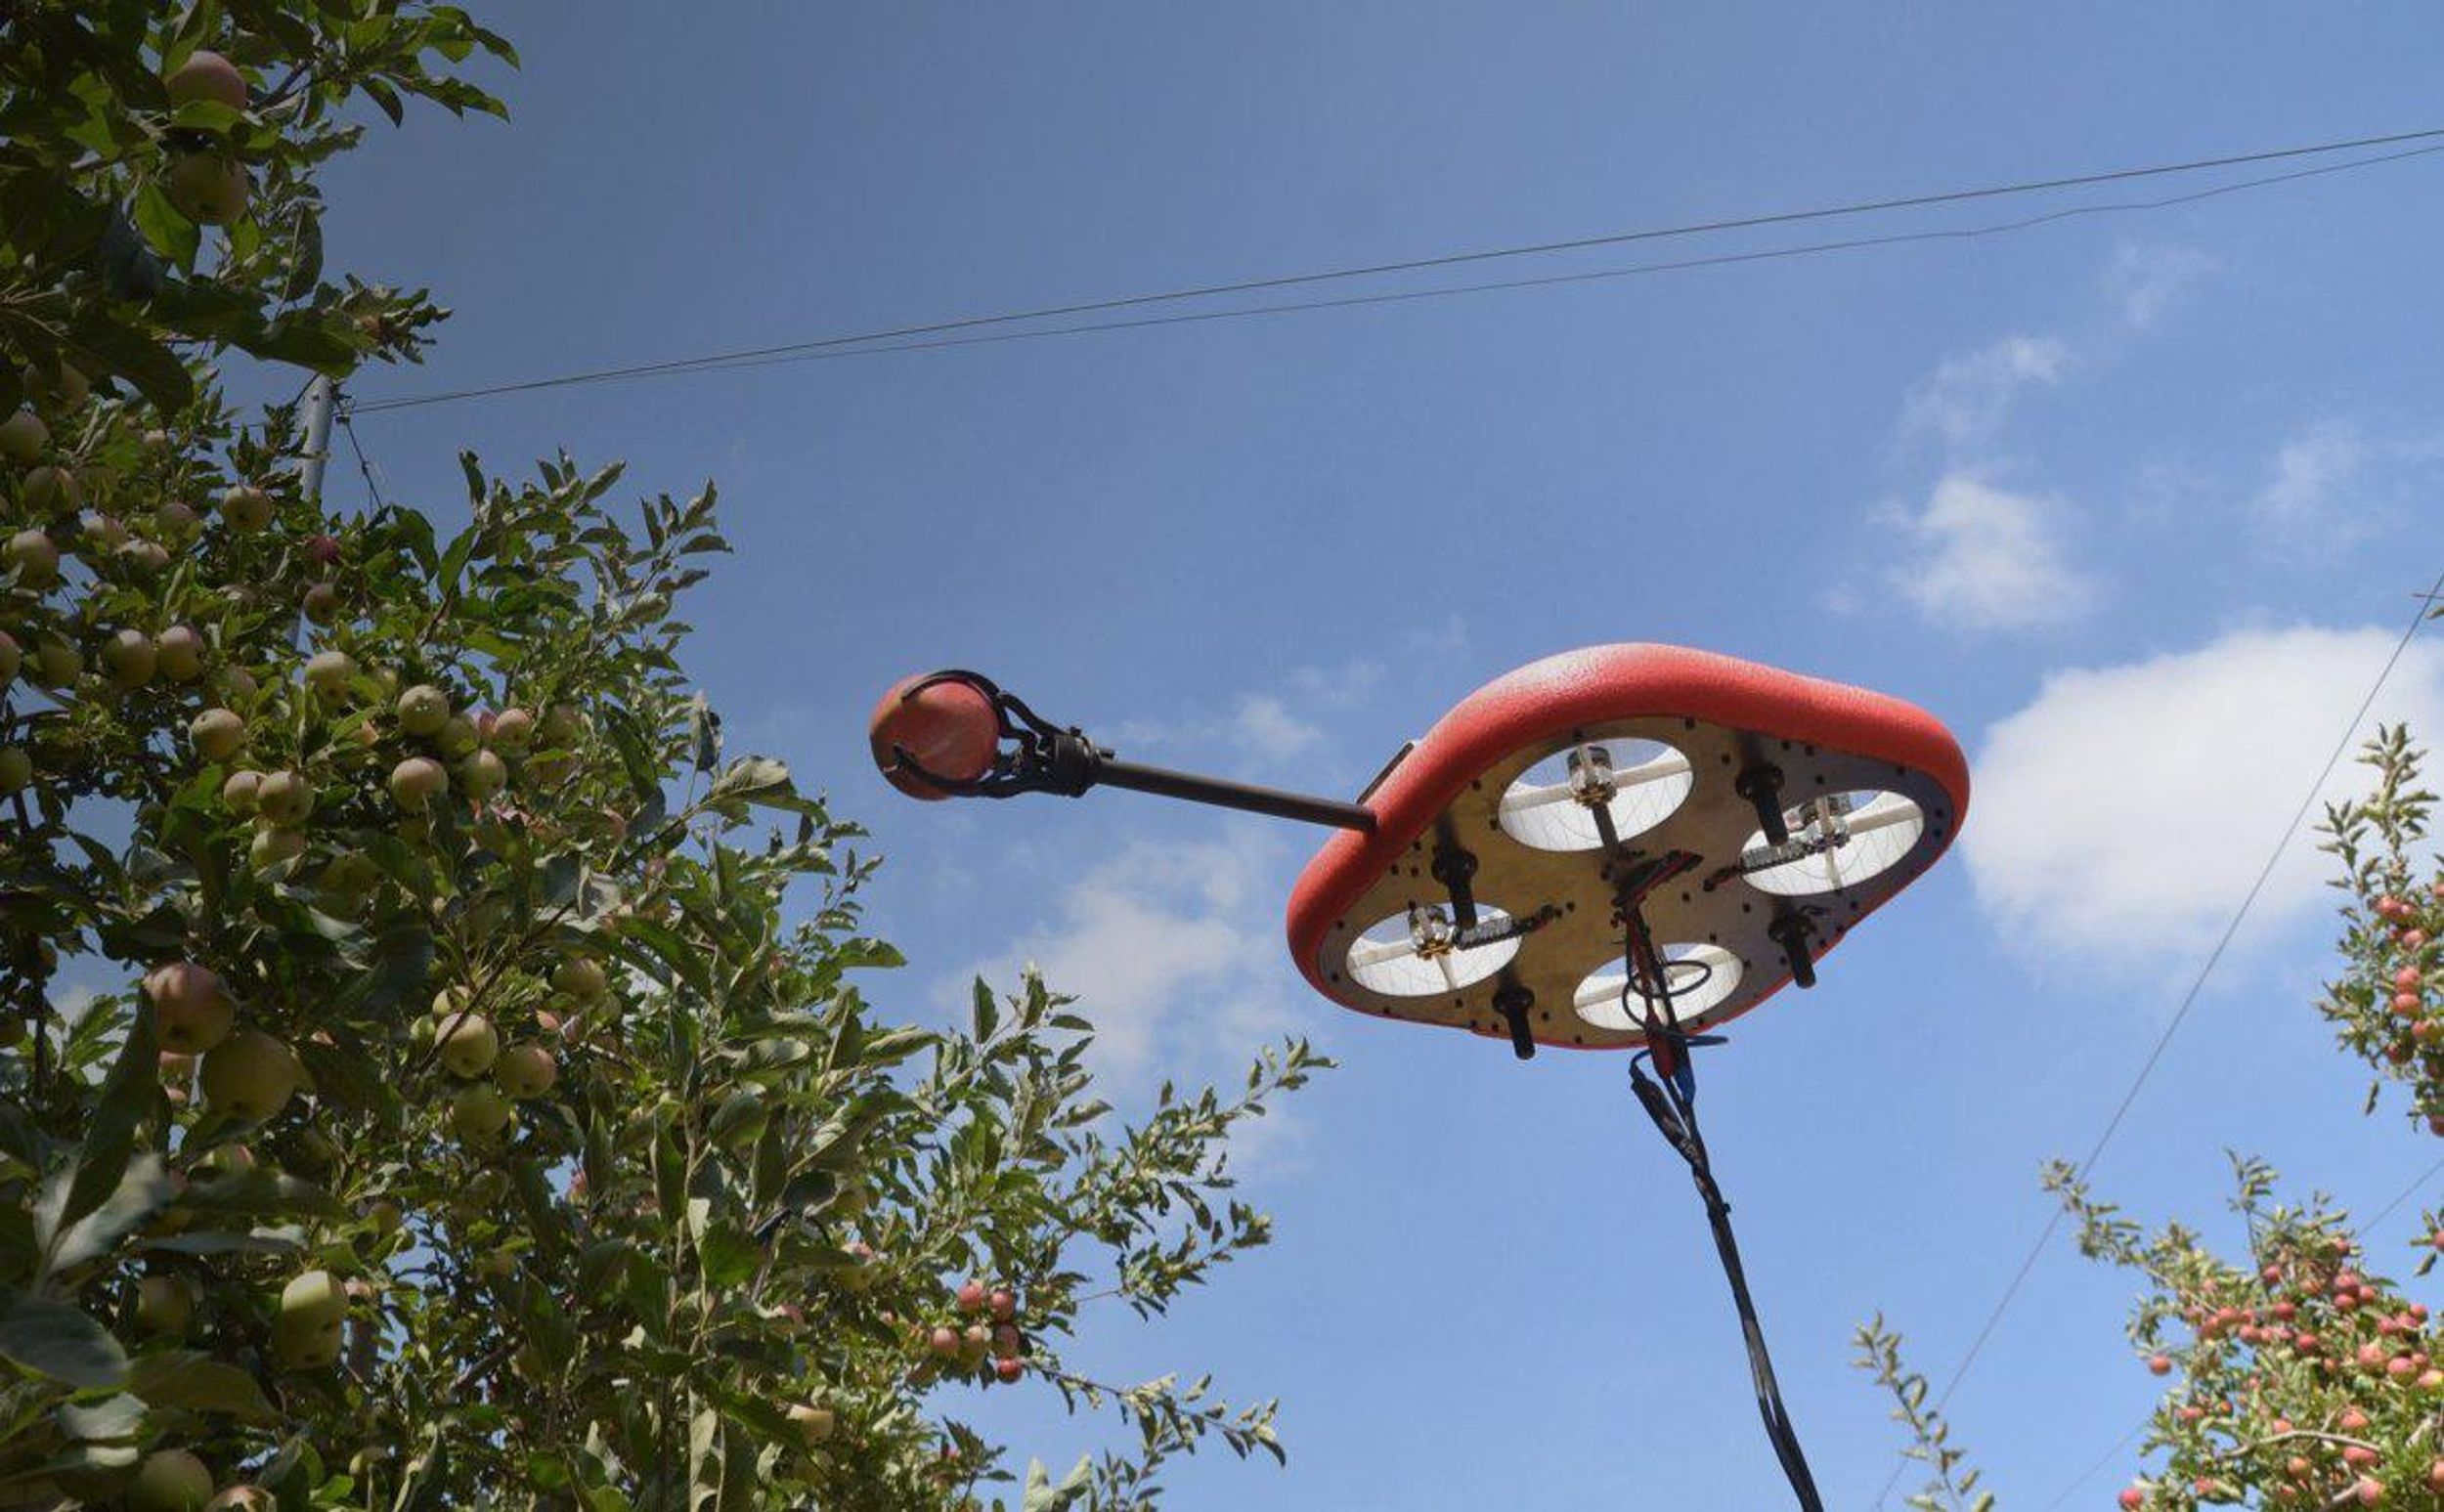 Photo of a square red drone next to an apple tree from below, equipped with a gripper containing an apple